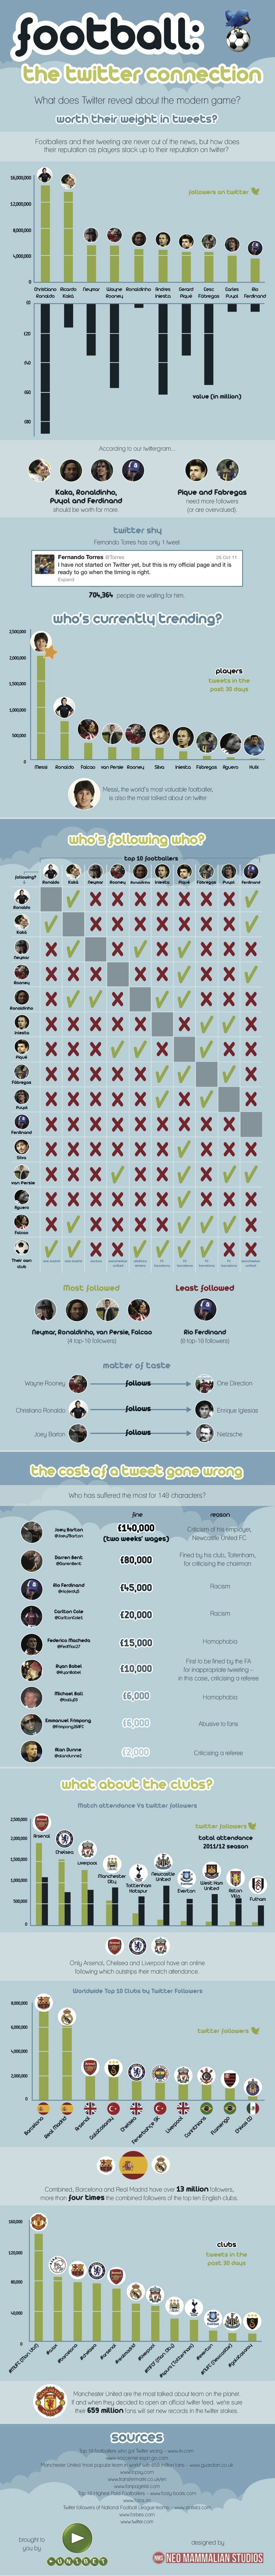 Footballers Twitter Infographic